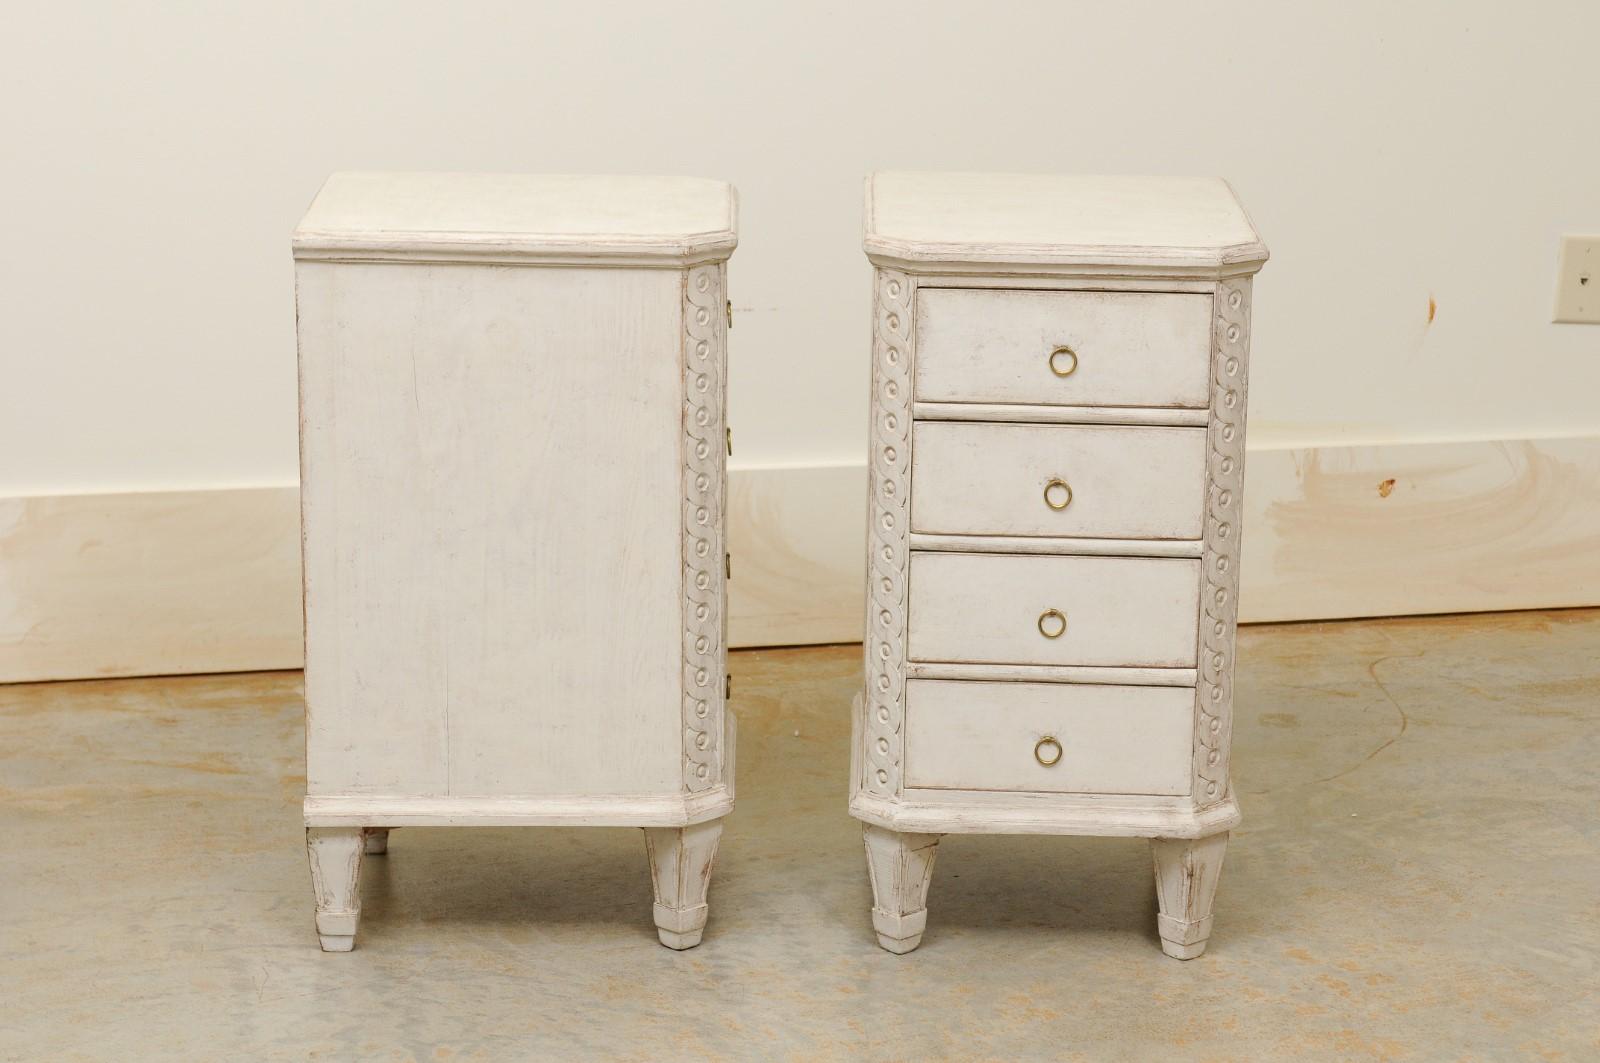 Pair of Swedish Neoclassical Style Painted Nightstand Tables with Guilloches 5